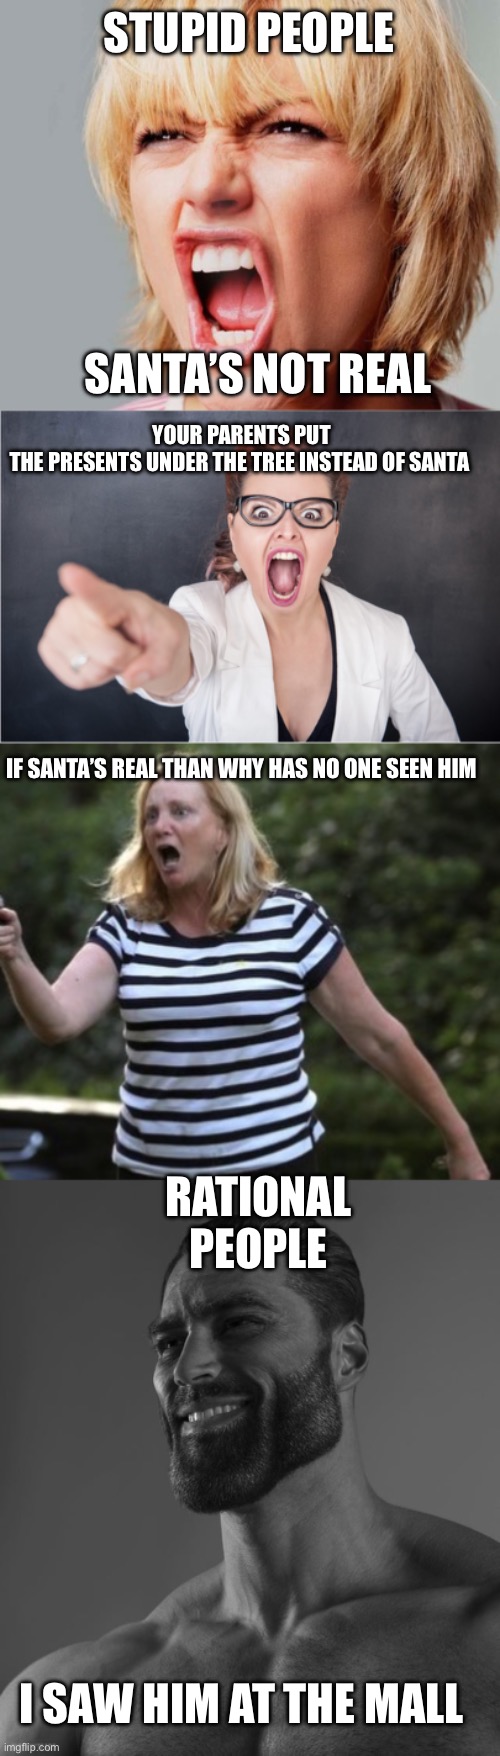 That’s what I’m saying | STUPID PEOPLE; SANTA’S NOT REAL; YOUR PARENTS PUT THE PRESENTS UNDER THE TREE INSTEAD OF SANTA; IF SANTA’S REAL THAN WHY HAS NO ONE SEEN HIM; RATIONAL PEOPLE; I SAW HIM AT THE MALL | image tagged in super angry karen,angry karen,angry gun karen,giga chad | made w/ Imgflip meme maker